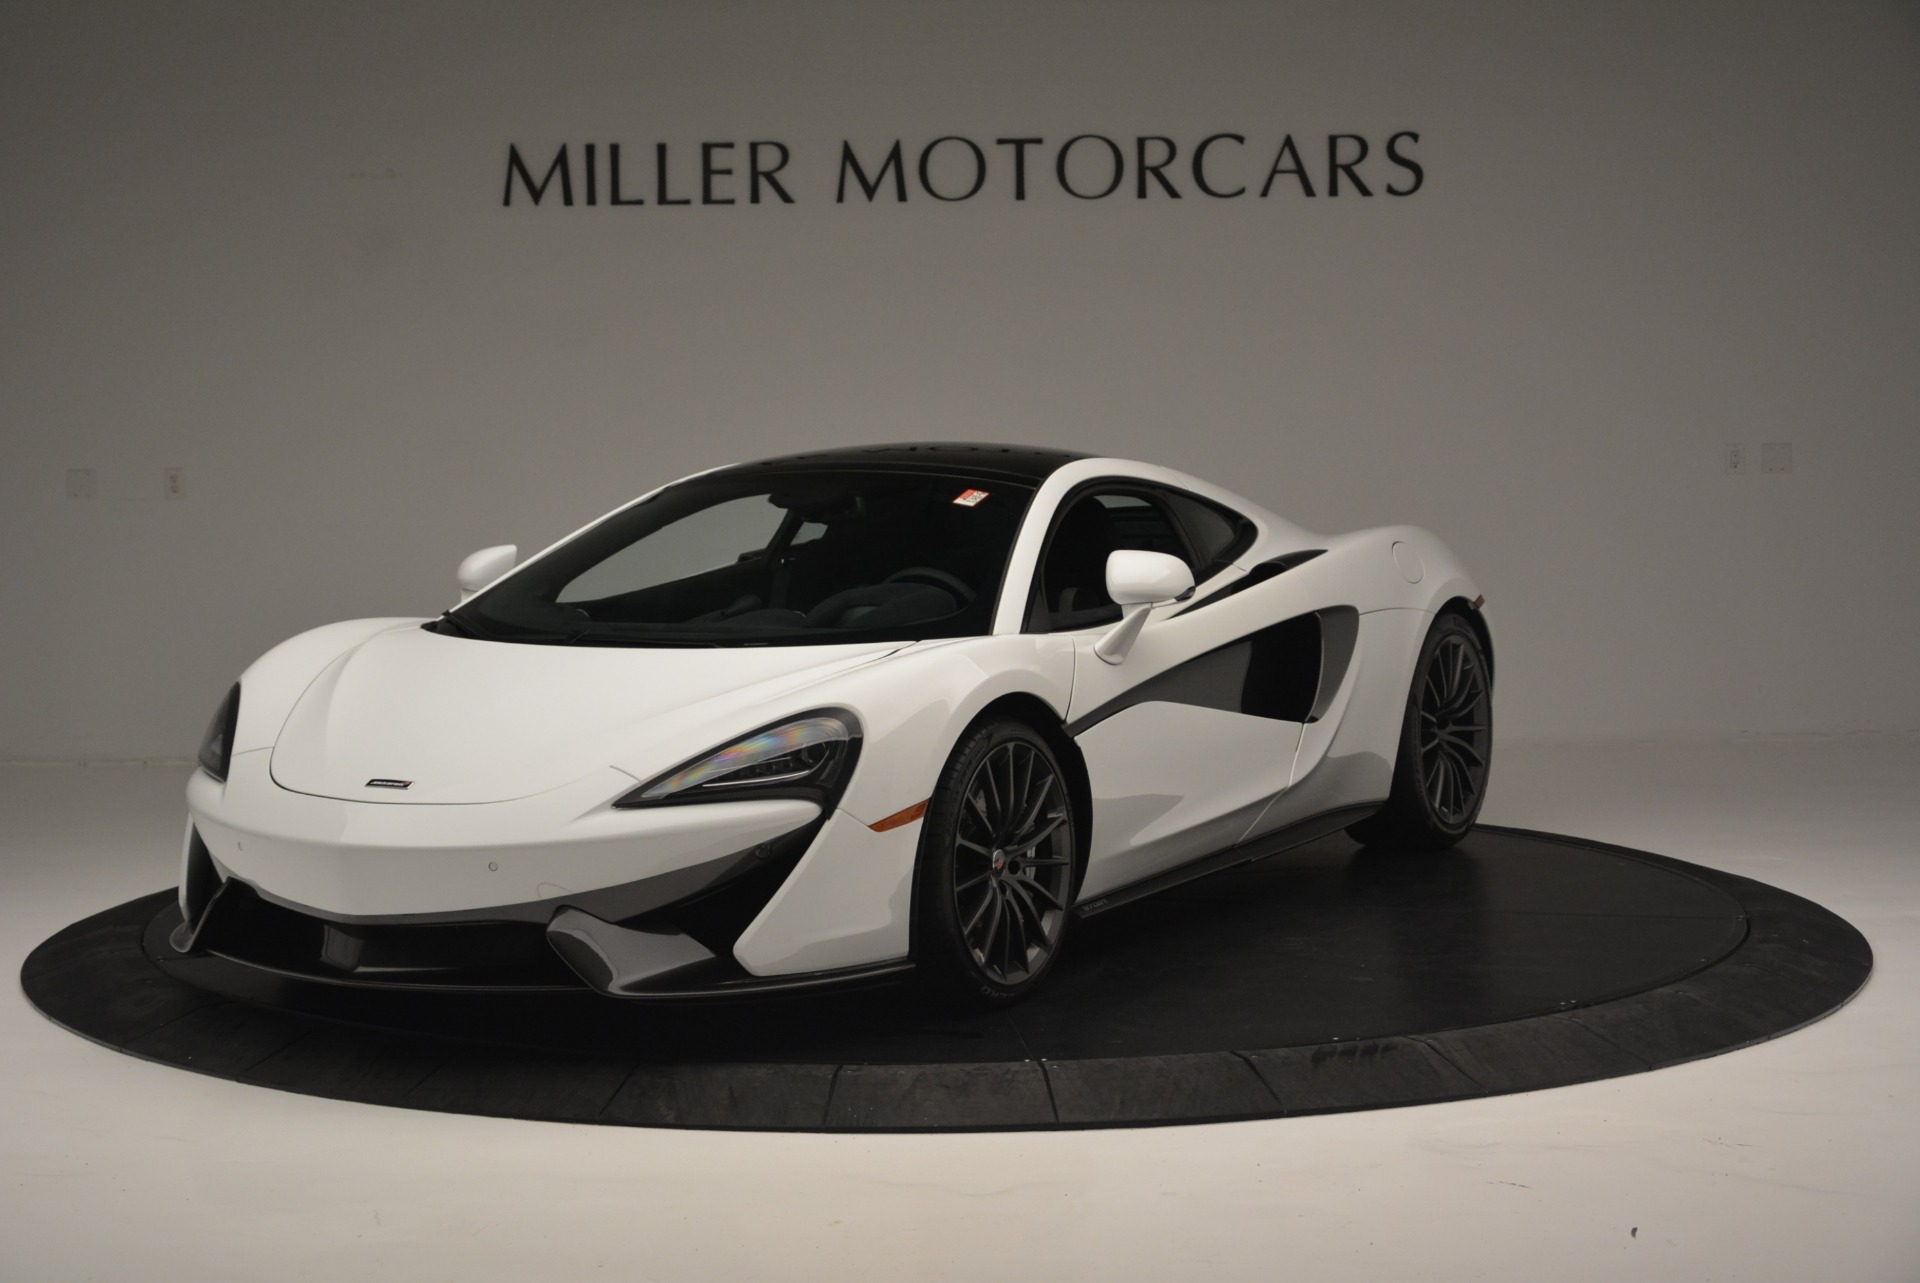 Used 2018 McLaren 570GT for sale Sold at Bentley Greenwich in Greenwich CT 06830 1